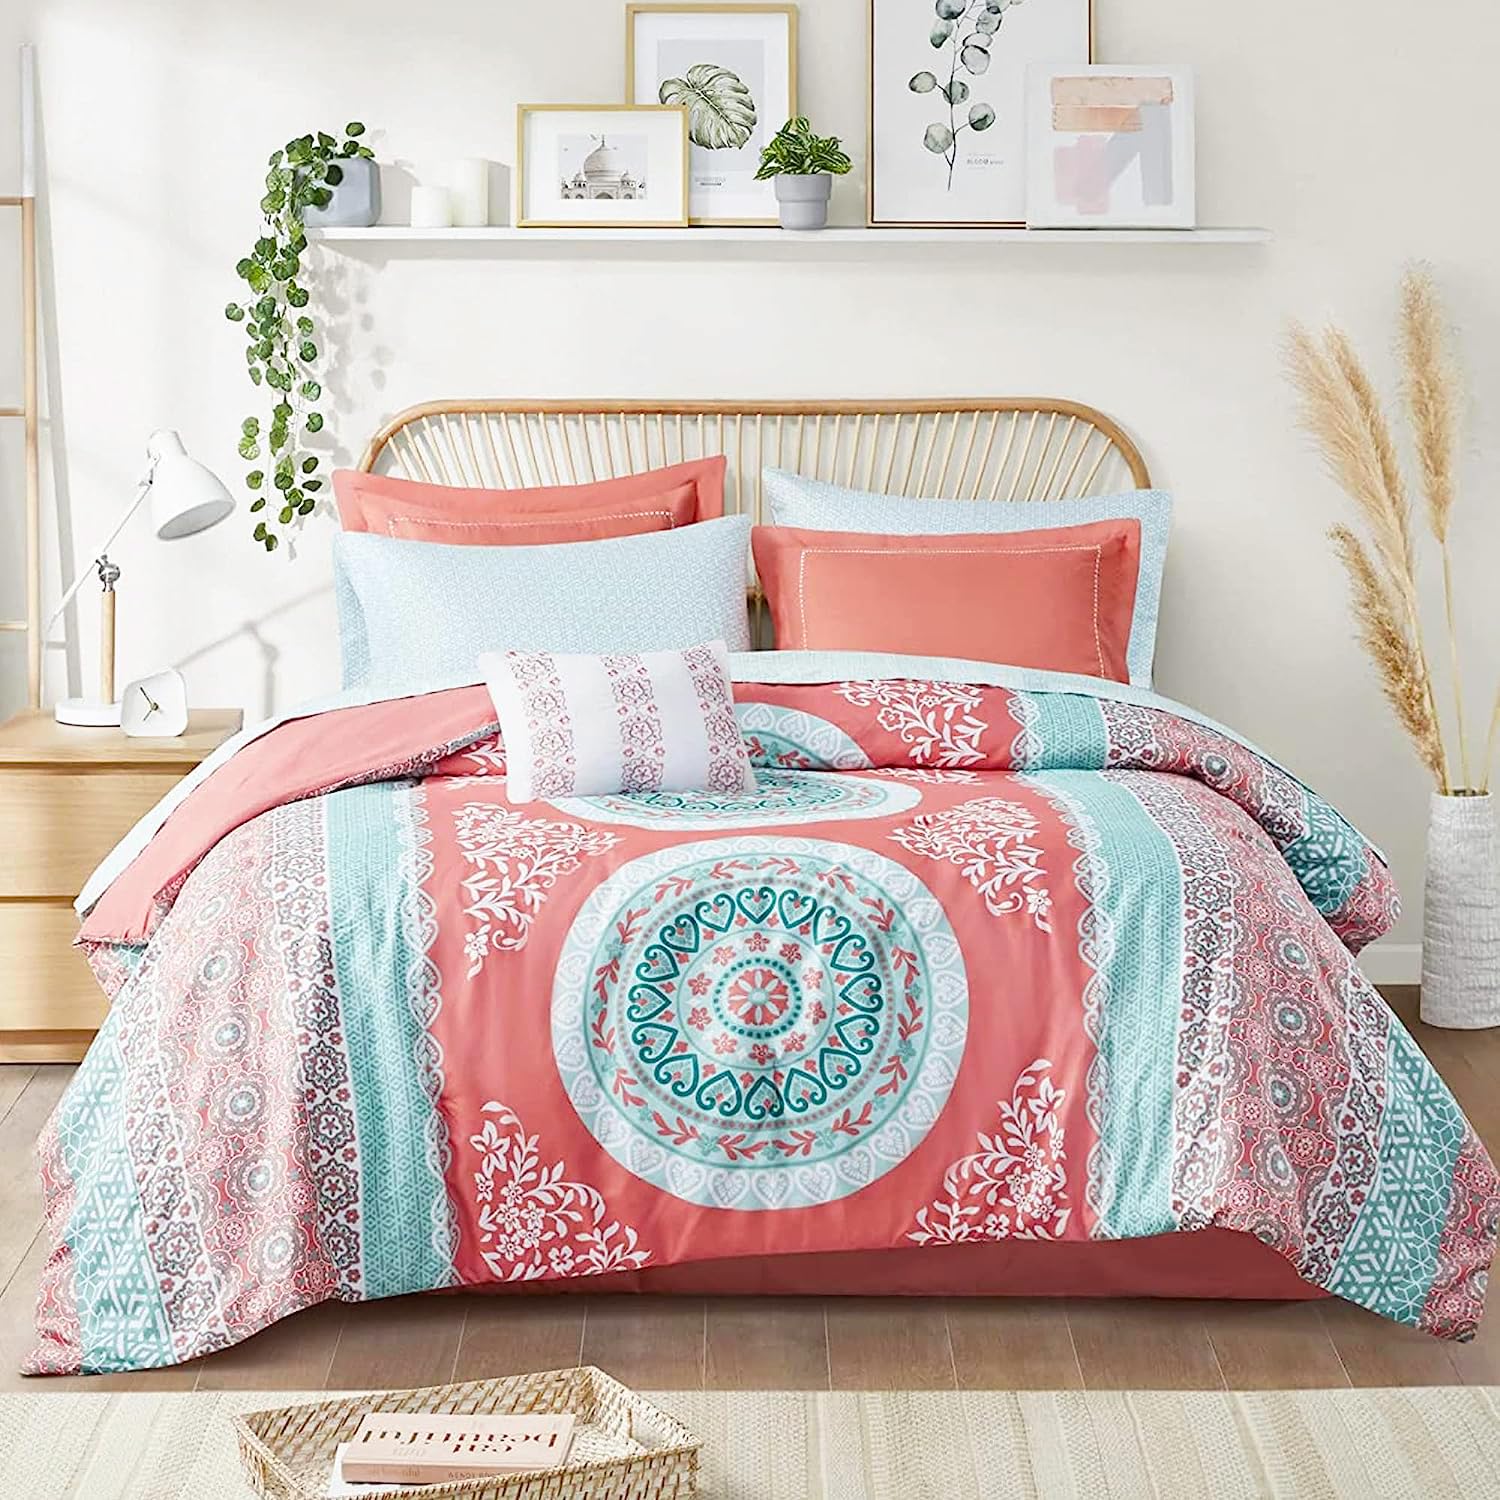 Intelligent Design 9-Piece Queen Comforter Sets with Sheet Bed in a Bag Coral Medallion Print Bedding Sets - image 1 of 12